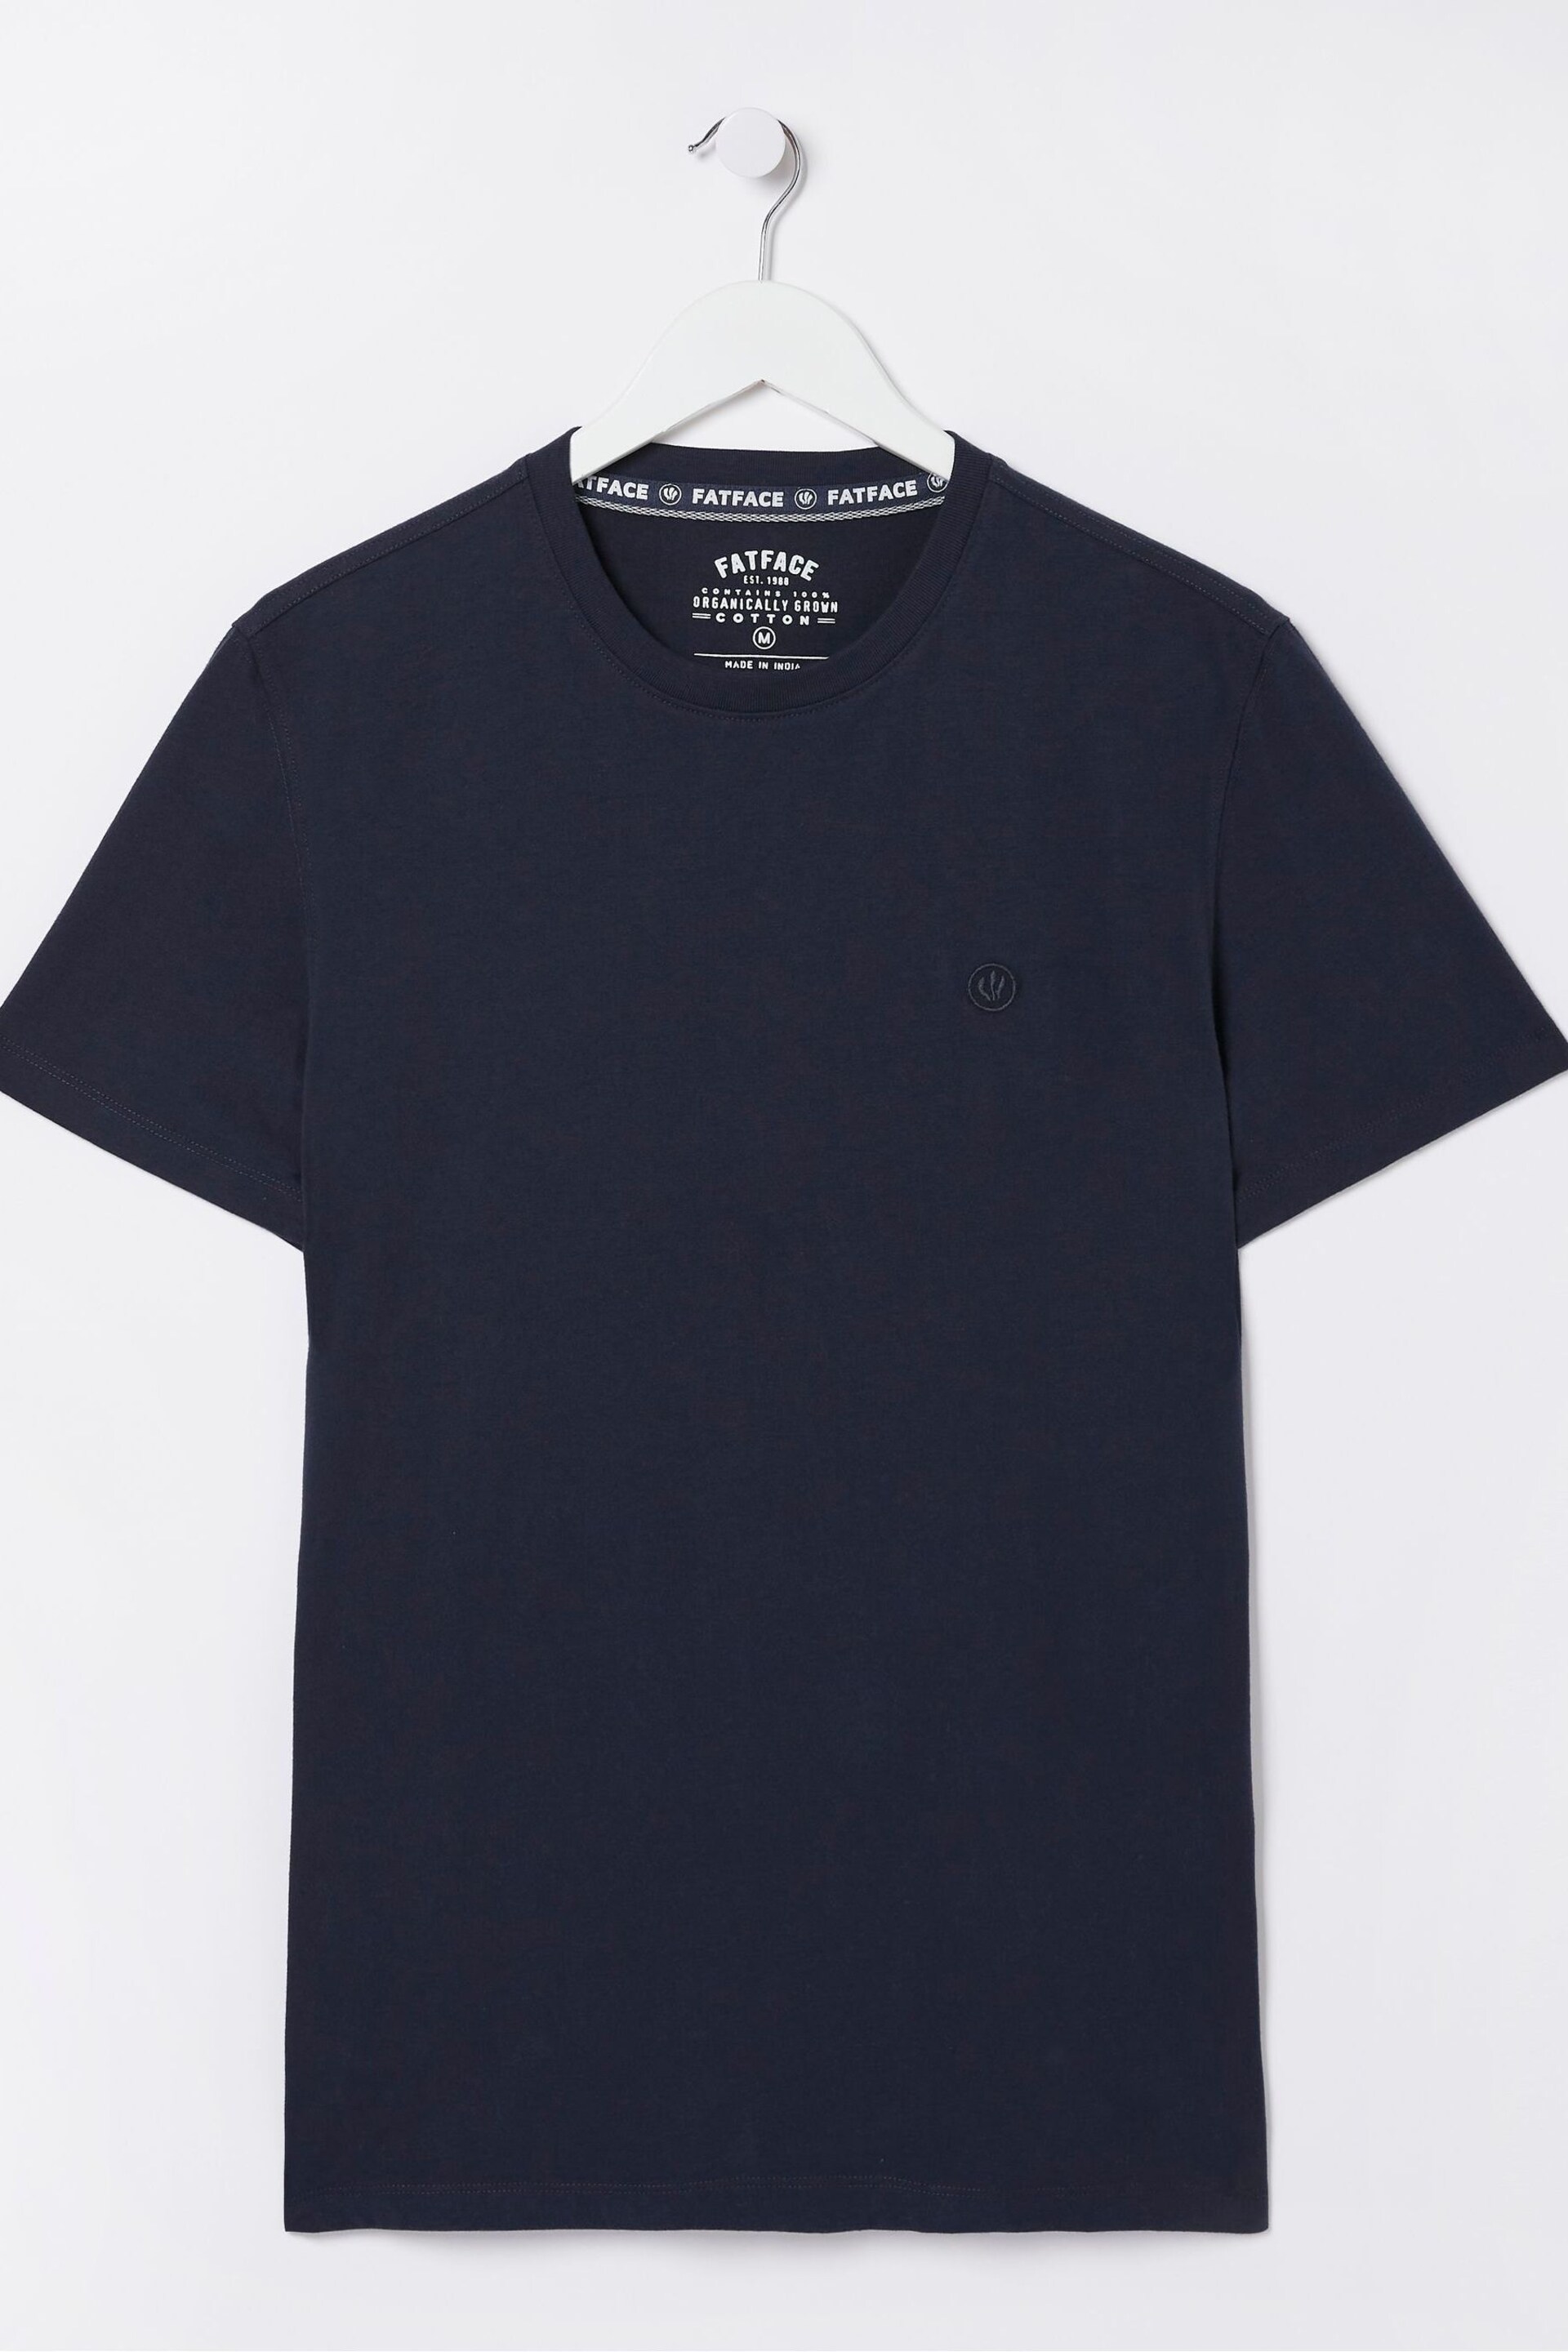 FatFace Blue Lulworth T-Shirt - Image 5 of 5